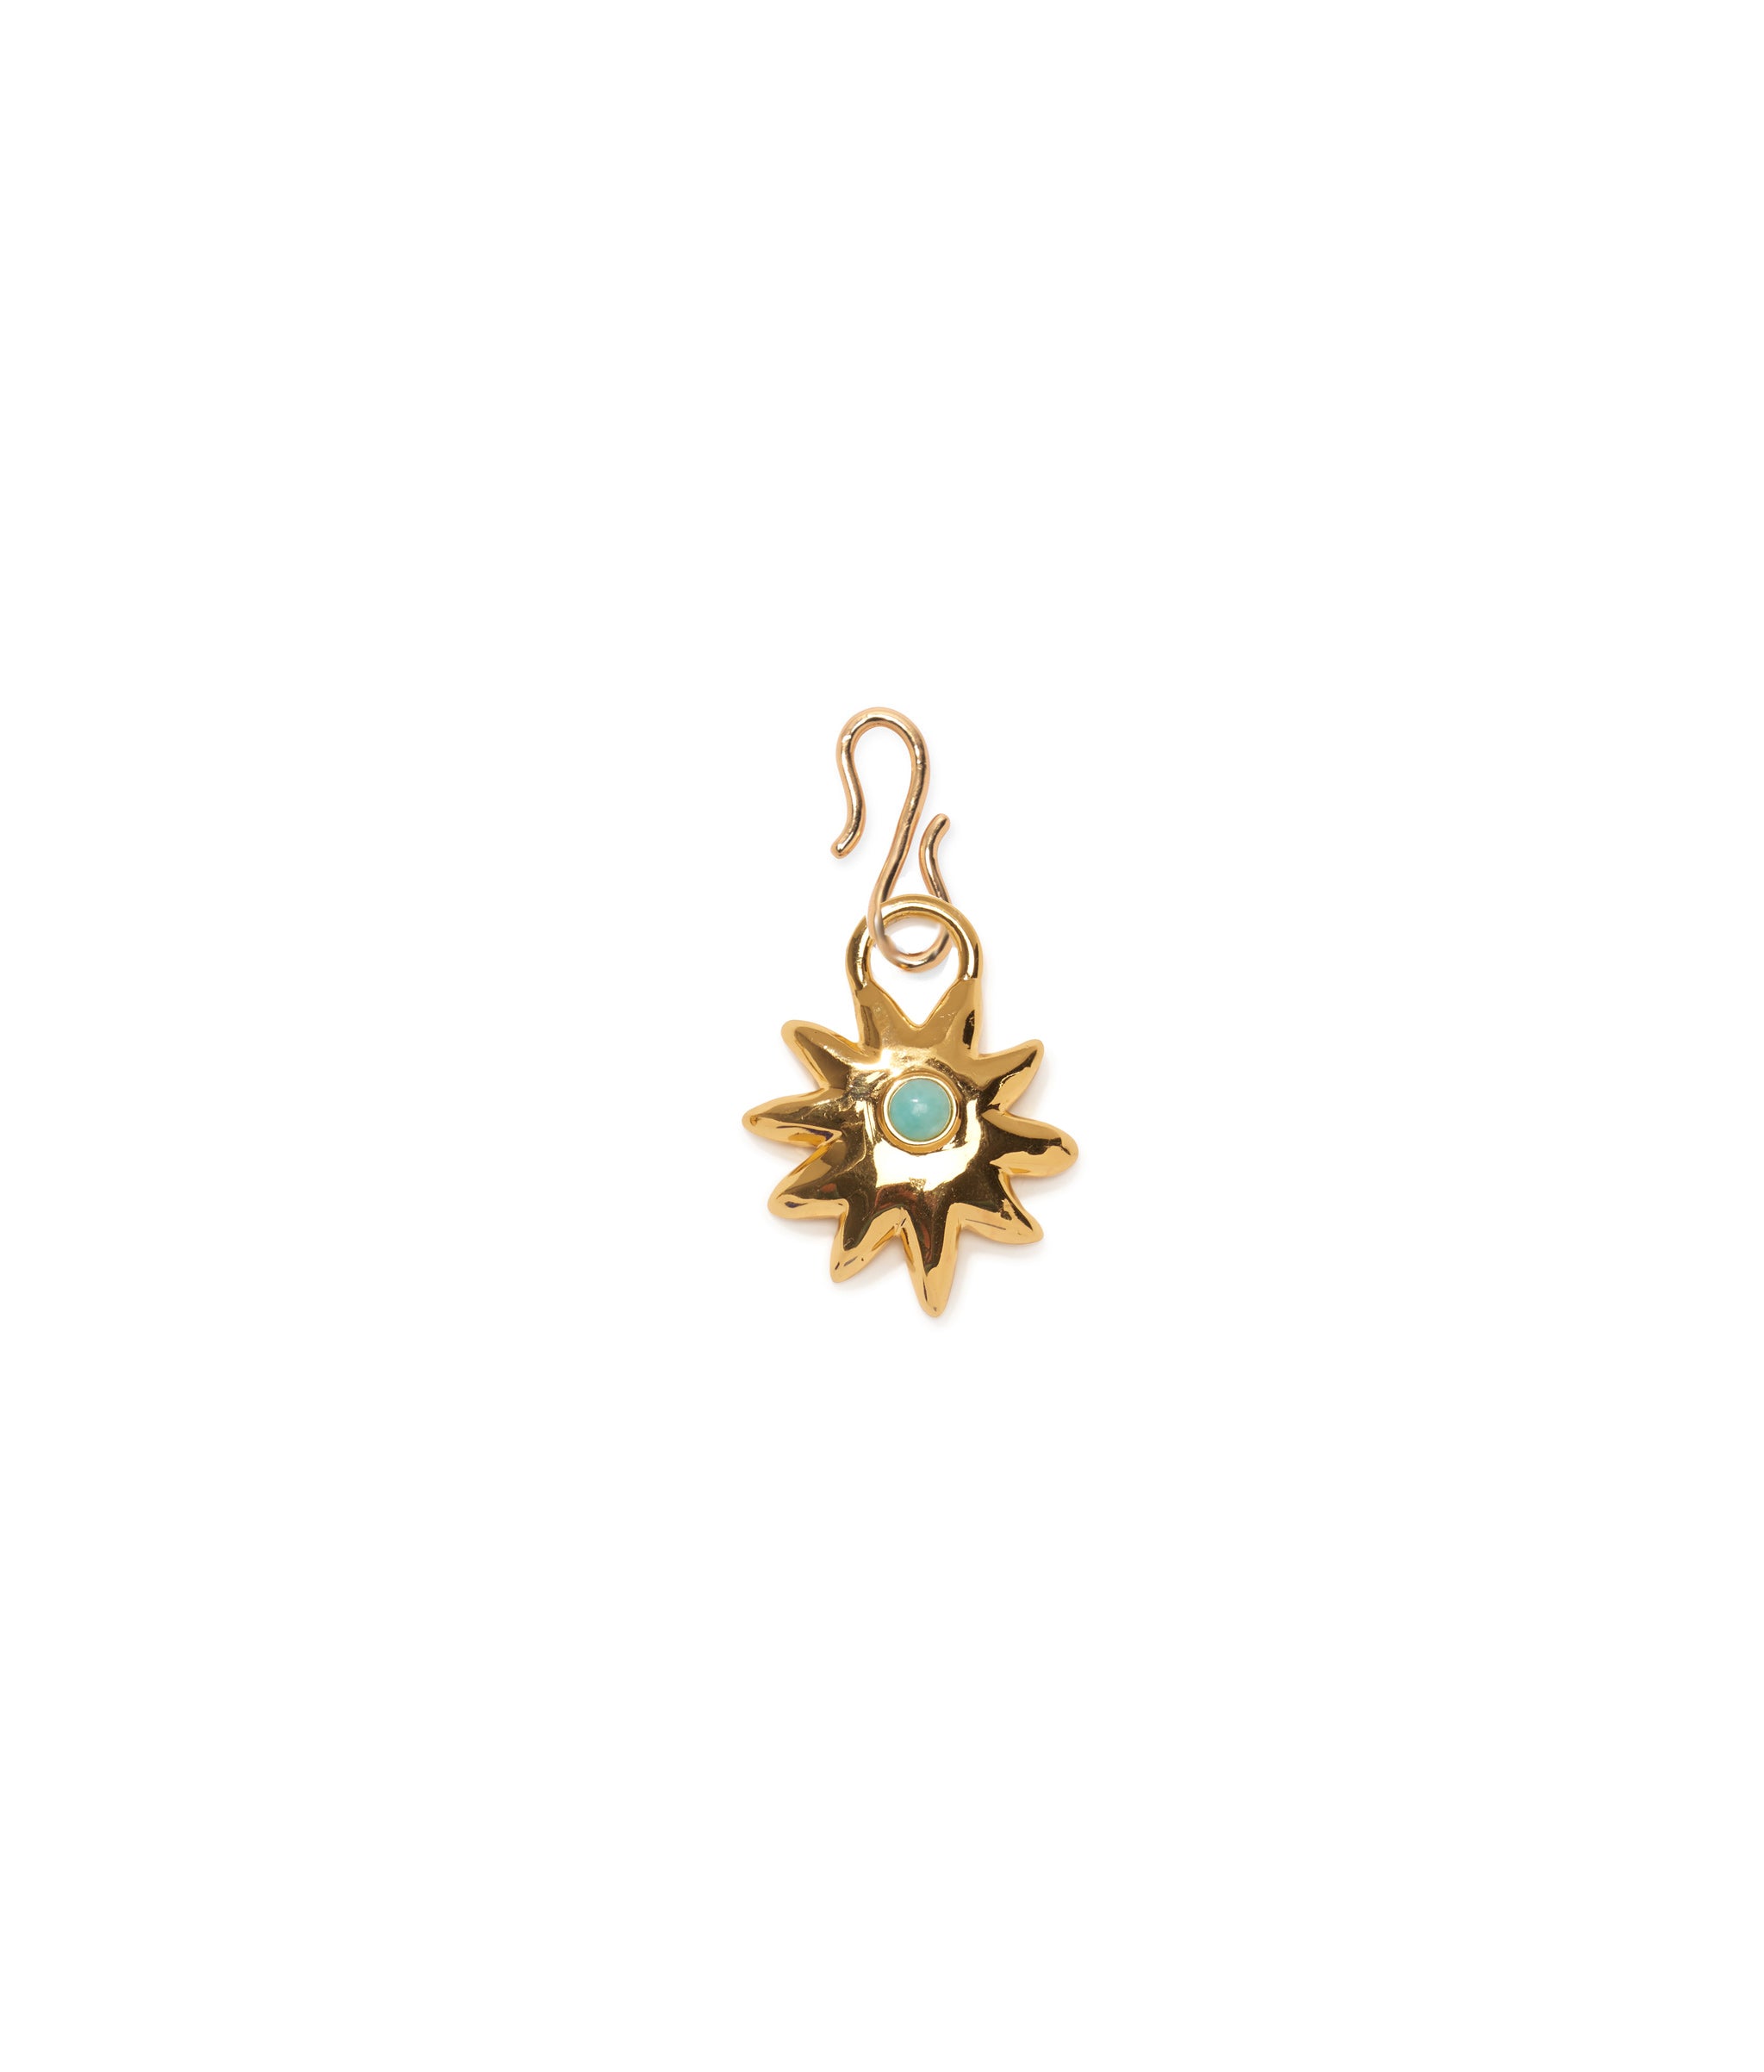 Helios Charm. Gold-plated brass starburst charm with inlaid turquoise stone and gold s-hook.